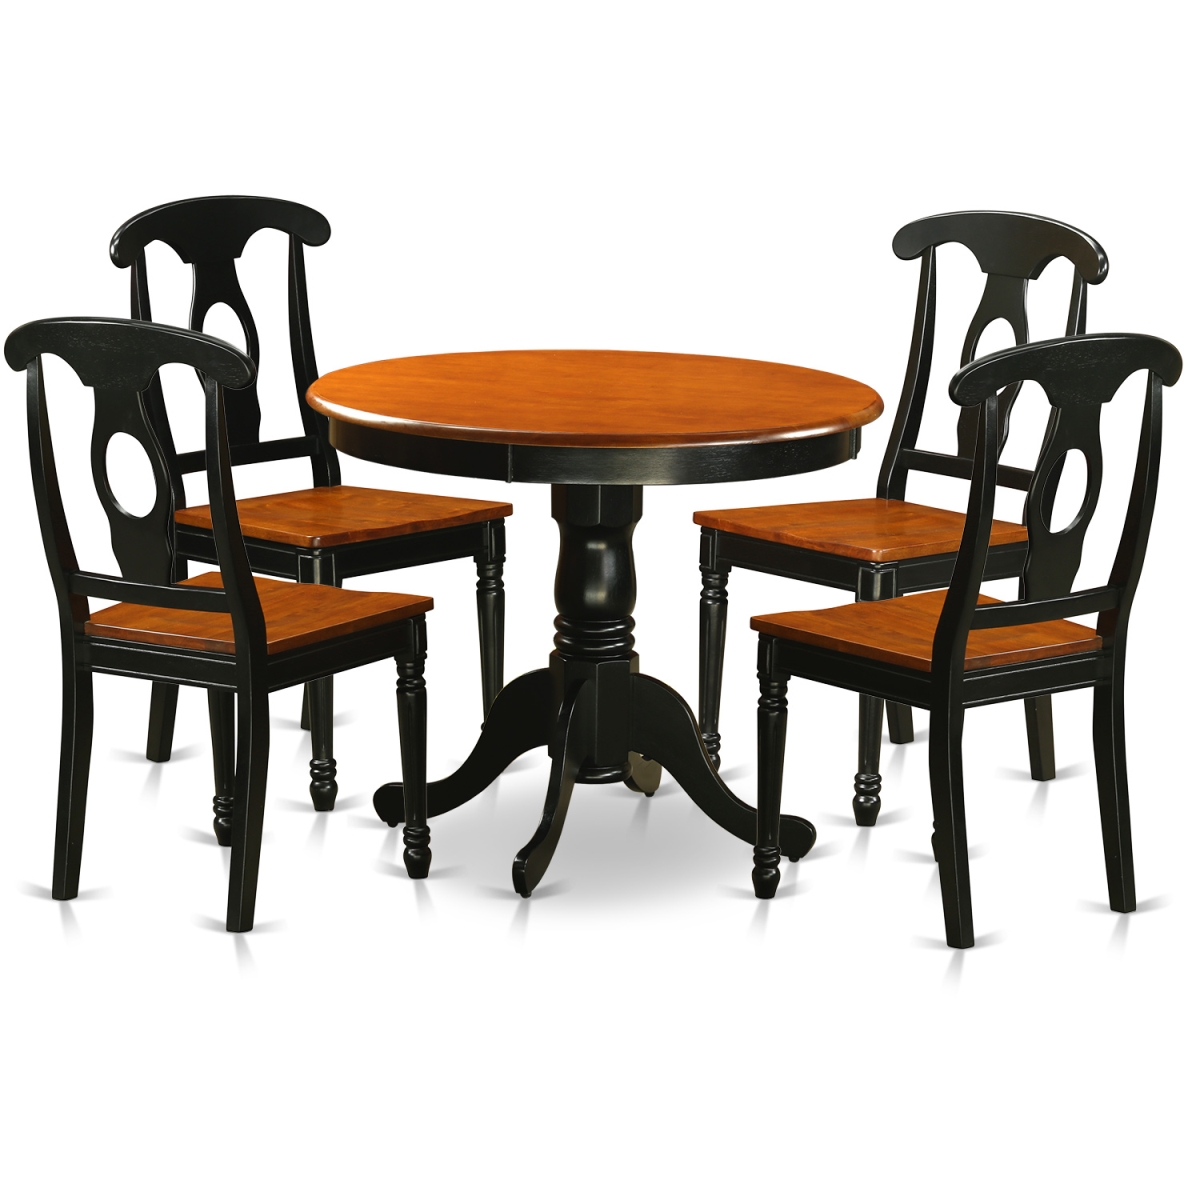 Picture of East West Furniture ANKE5-BLK-W Dining Set Including 4 Wood Chairs, Black & Cherry - 5 Piece